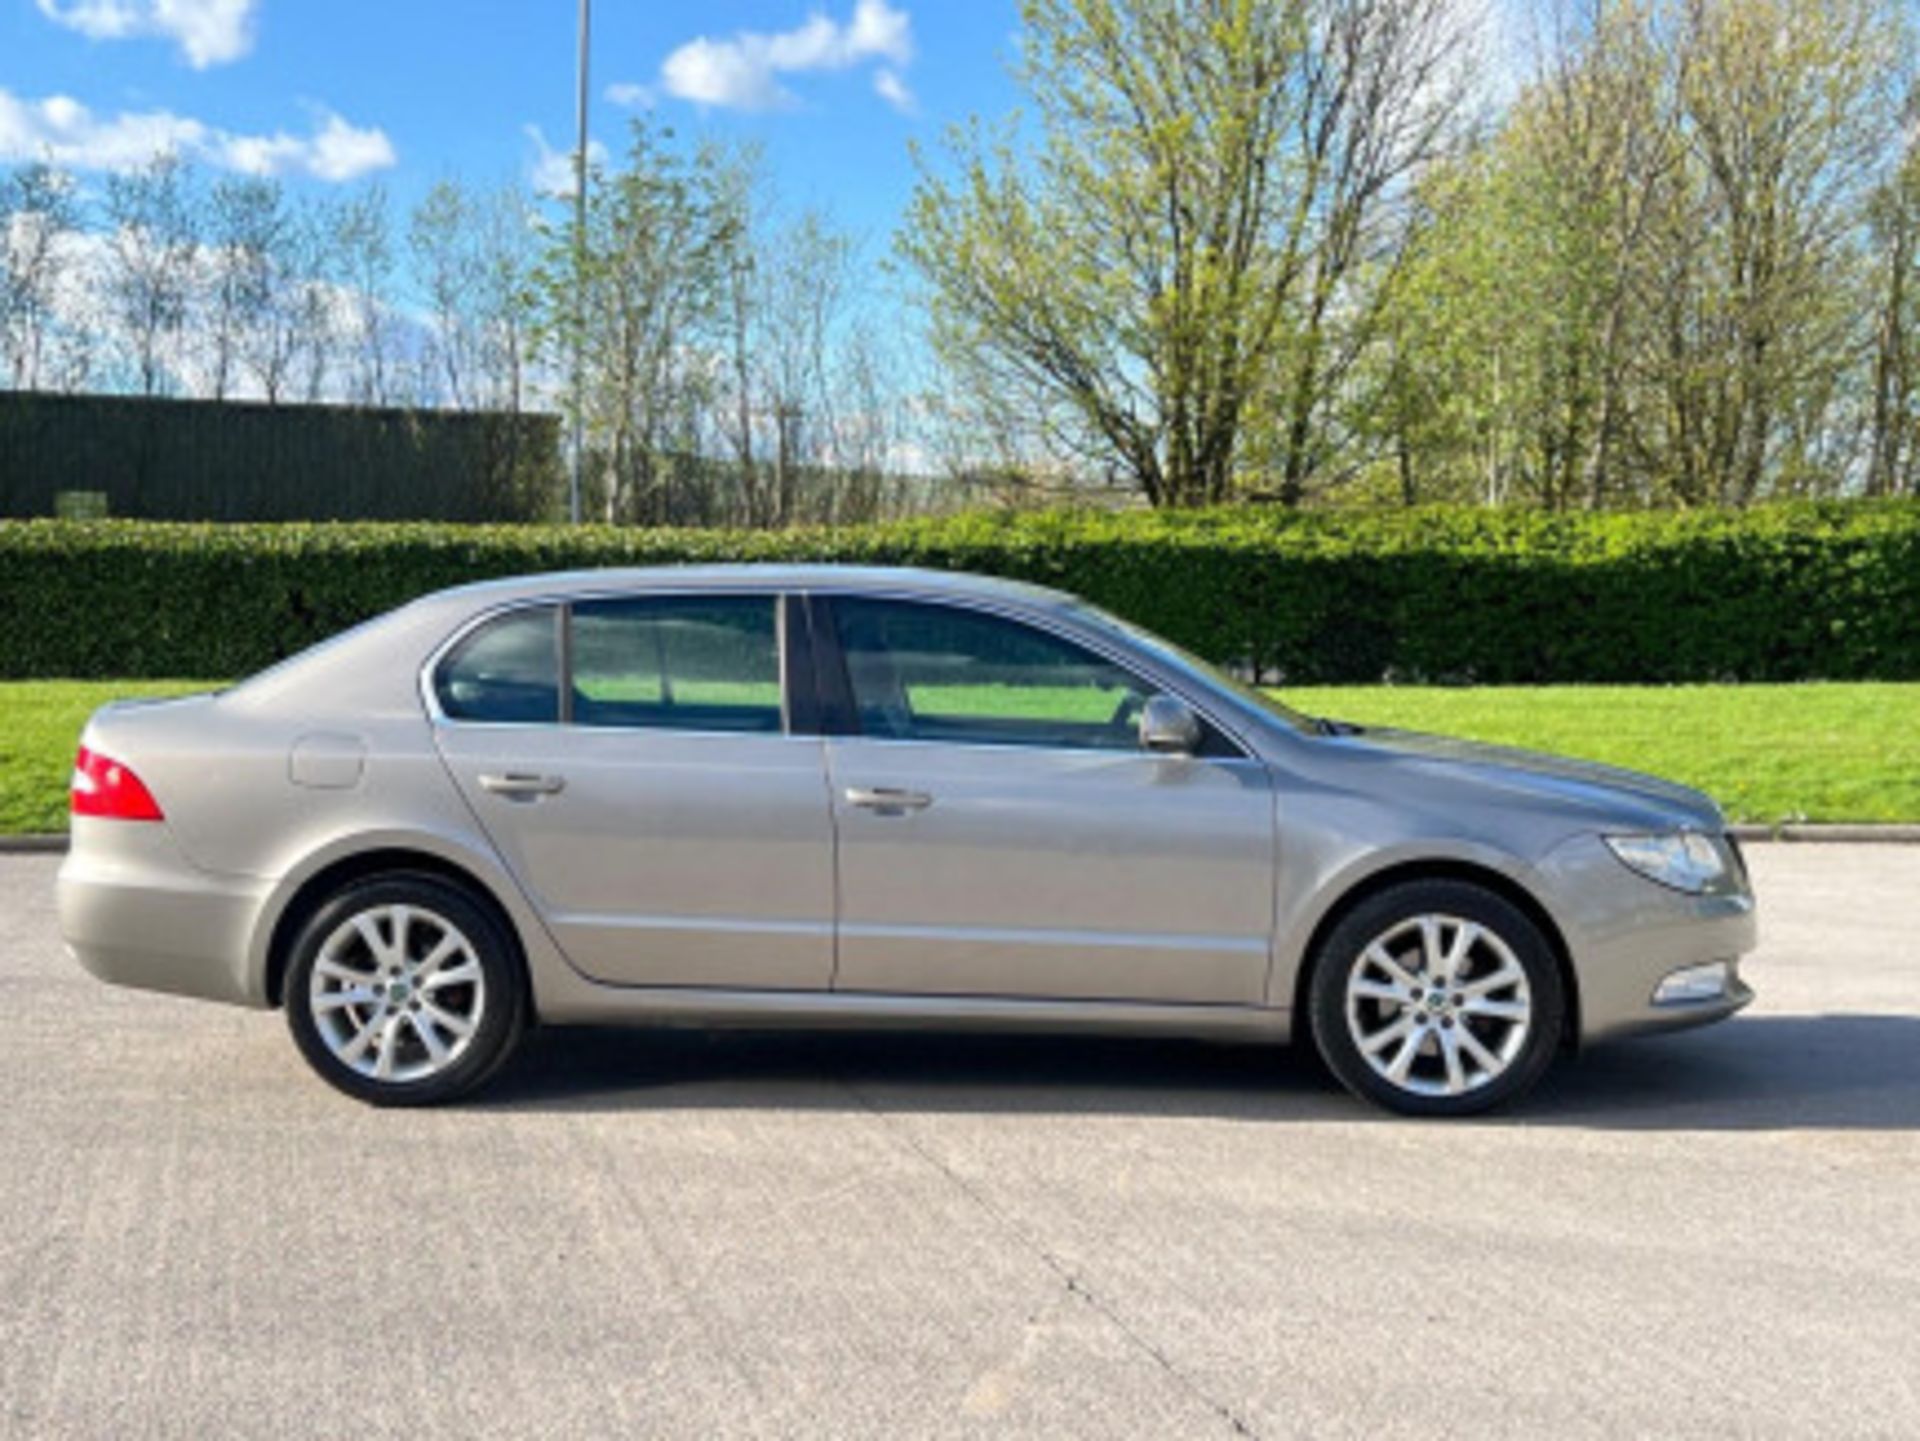 >>--NO VAT ON HAMMER--<<STYLISH AND RELIABLE SKODA SUPERB 1.6 TDI S GREENLINE II EURO 5 - Image 38 of 141